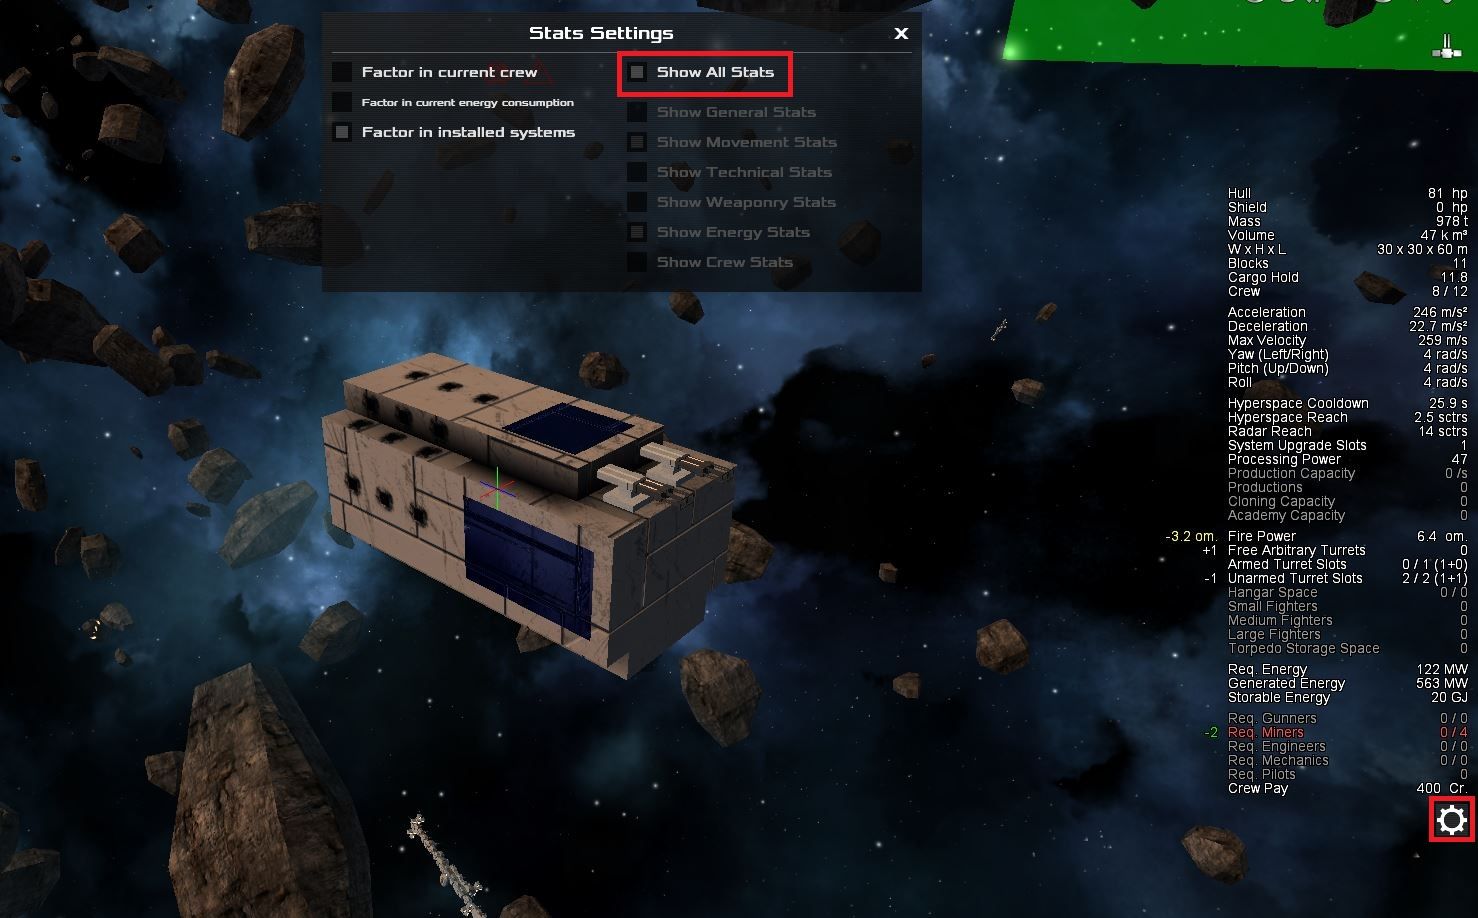 A very basic starter ship. The gear icon that helps you see various stats is outlined in red, as is the &quot;See All Stats&quot; option.